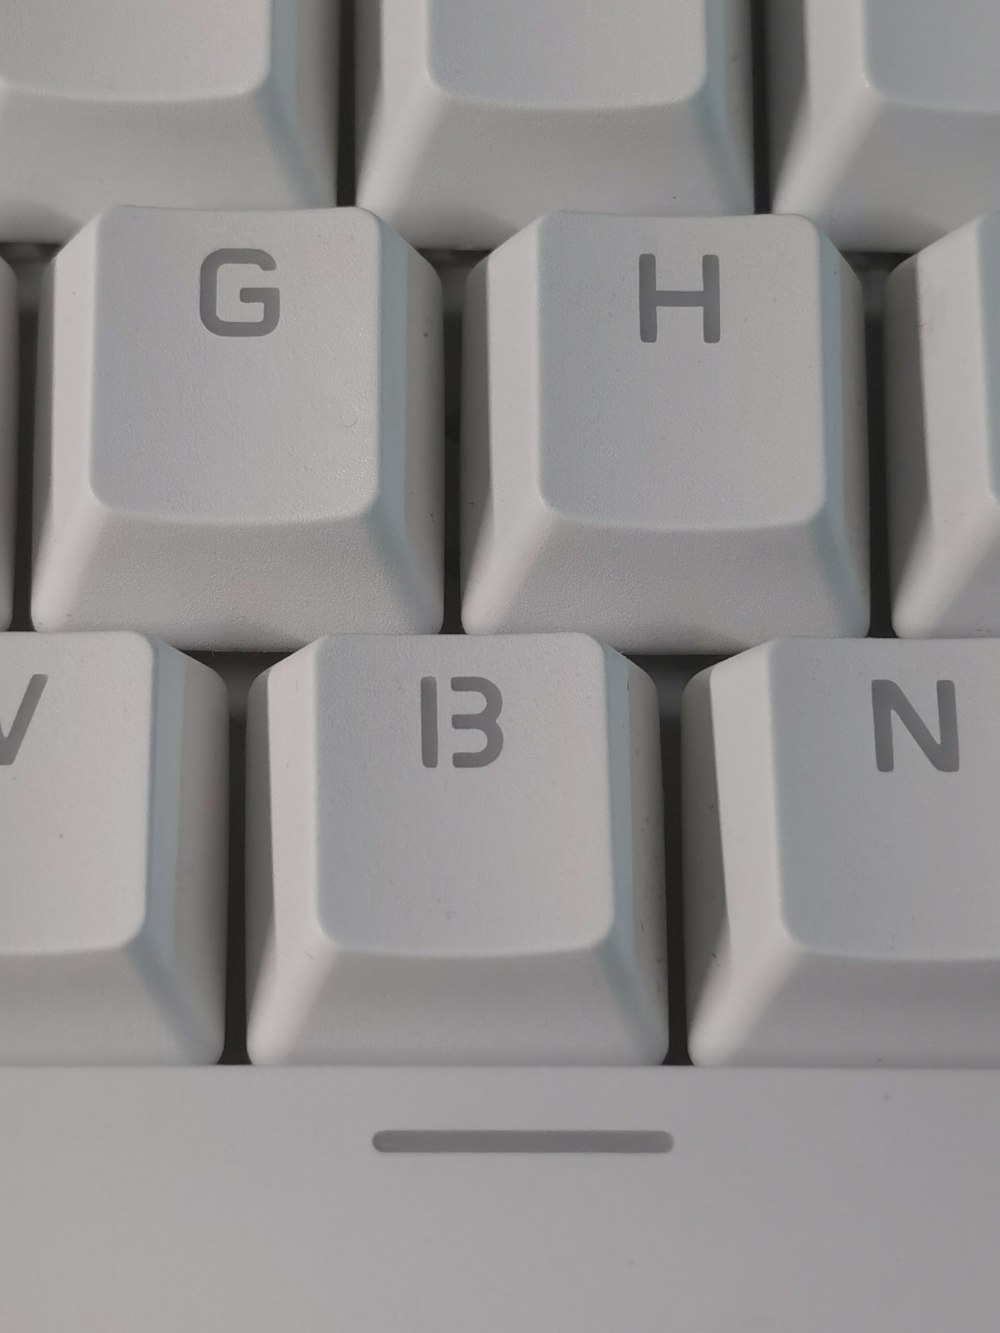 white computer keyboard showing letter b